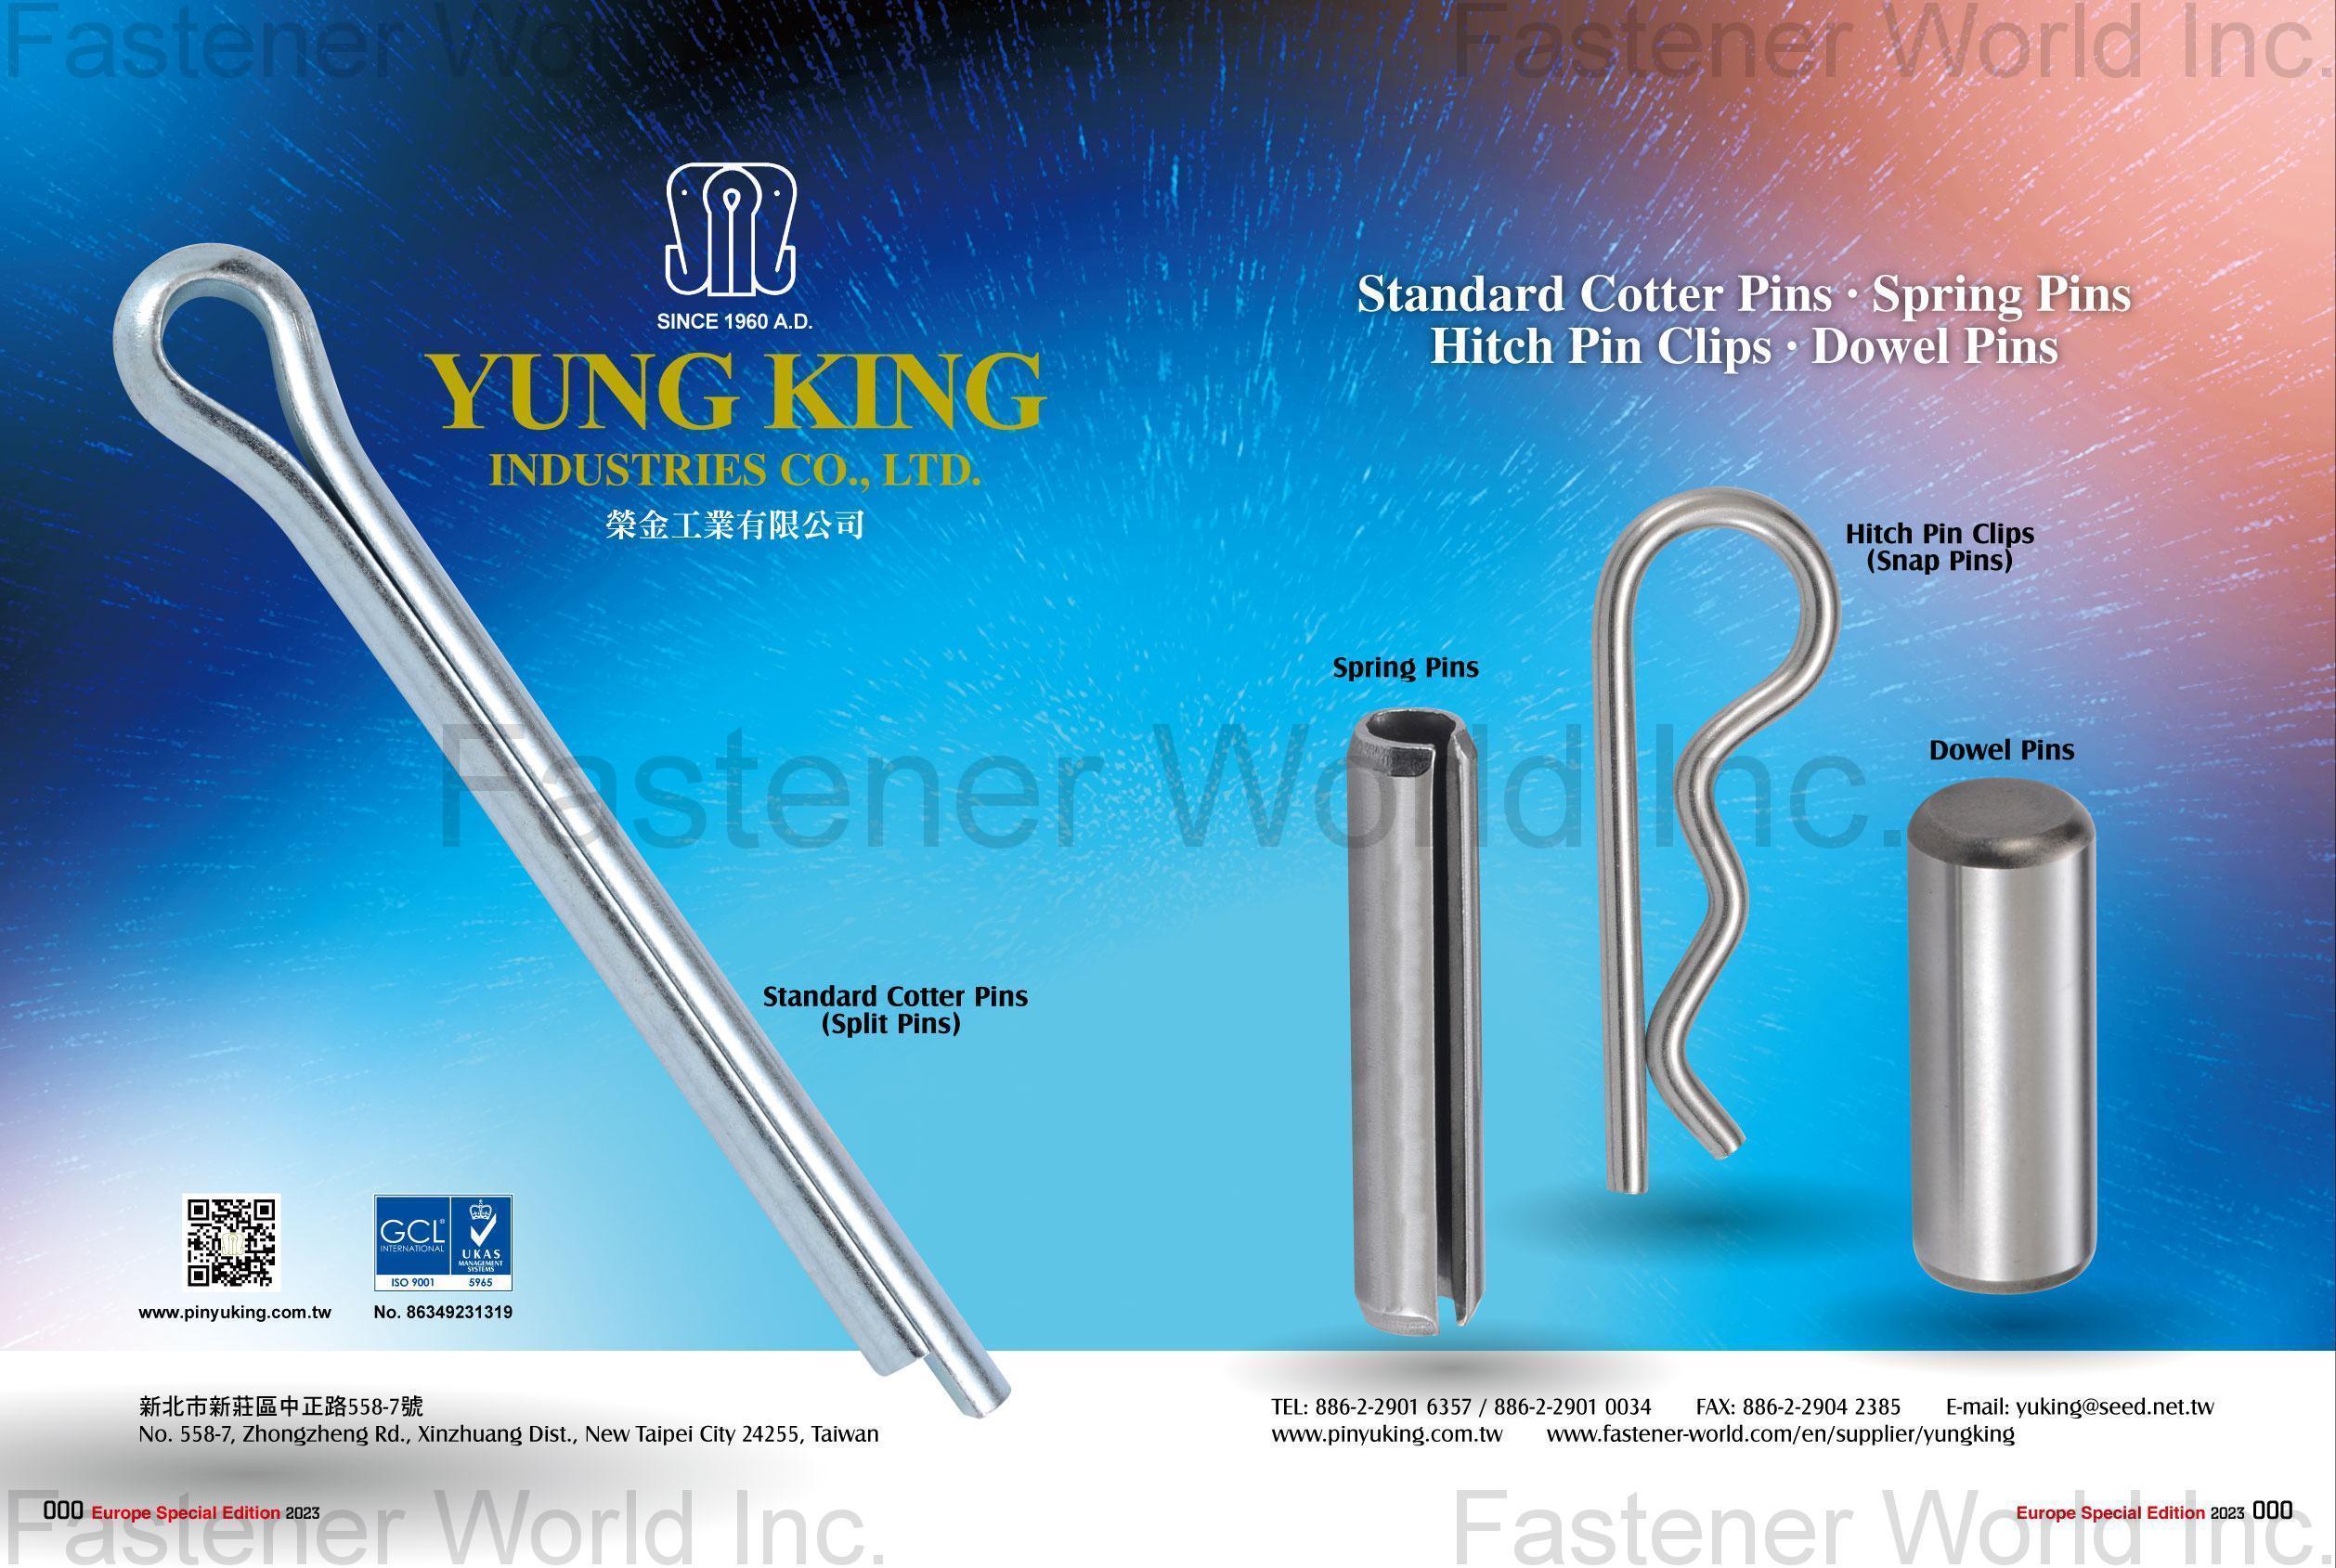 YUNG KING INDUSTRIES CO., LTD.  , Cotter Pins and Spring Pins, Hitch Pin Clips & Dowel Pins, Retaining Ring & Washers, Standard Cotter Pin, Spring Pin, Hitch Pin Clip (Snap Pin), Dowel Pin, Circlip & Washer, Quick Insert Pin, Special Pin